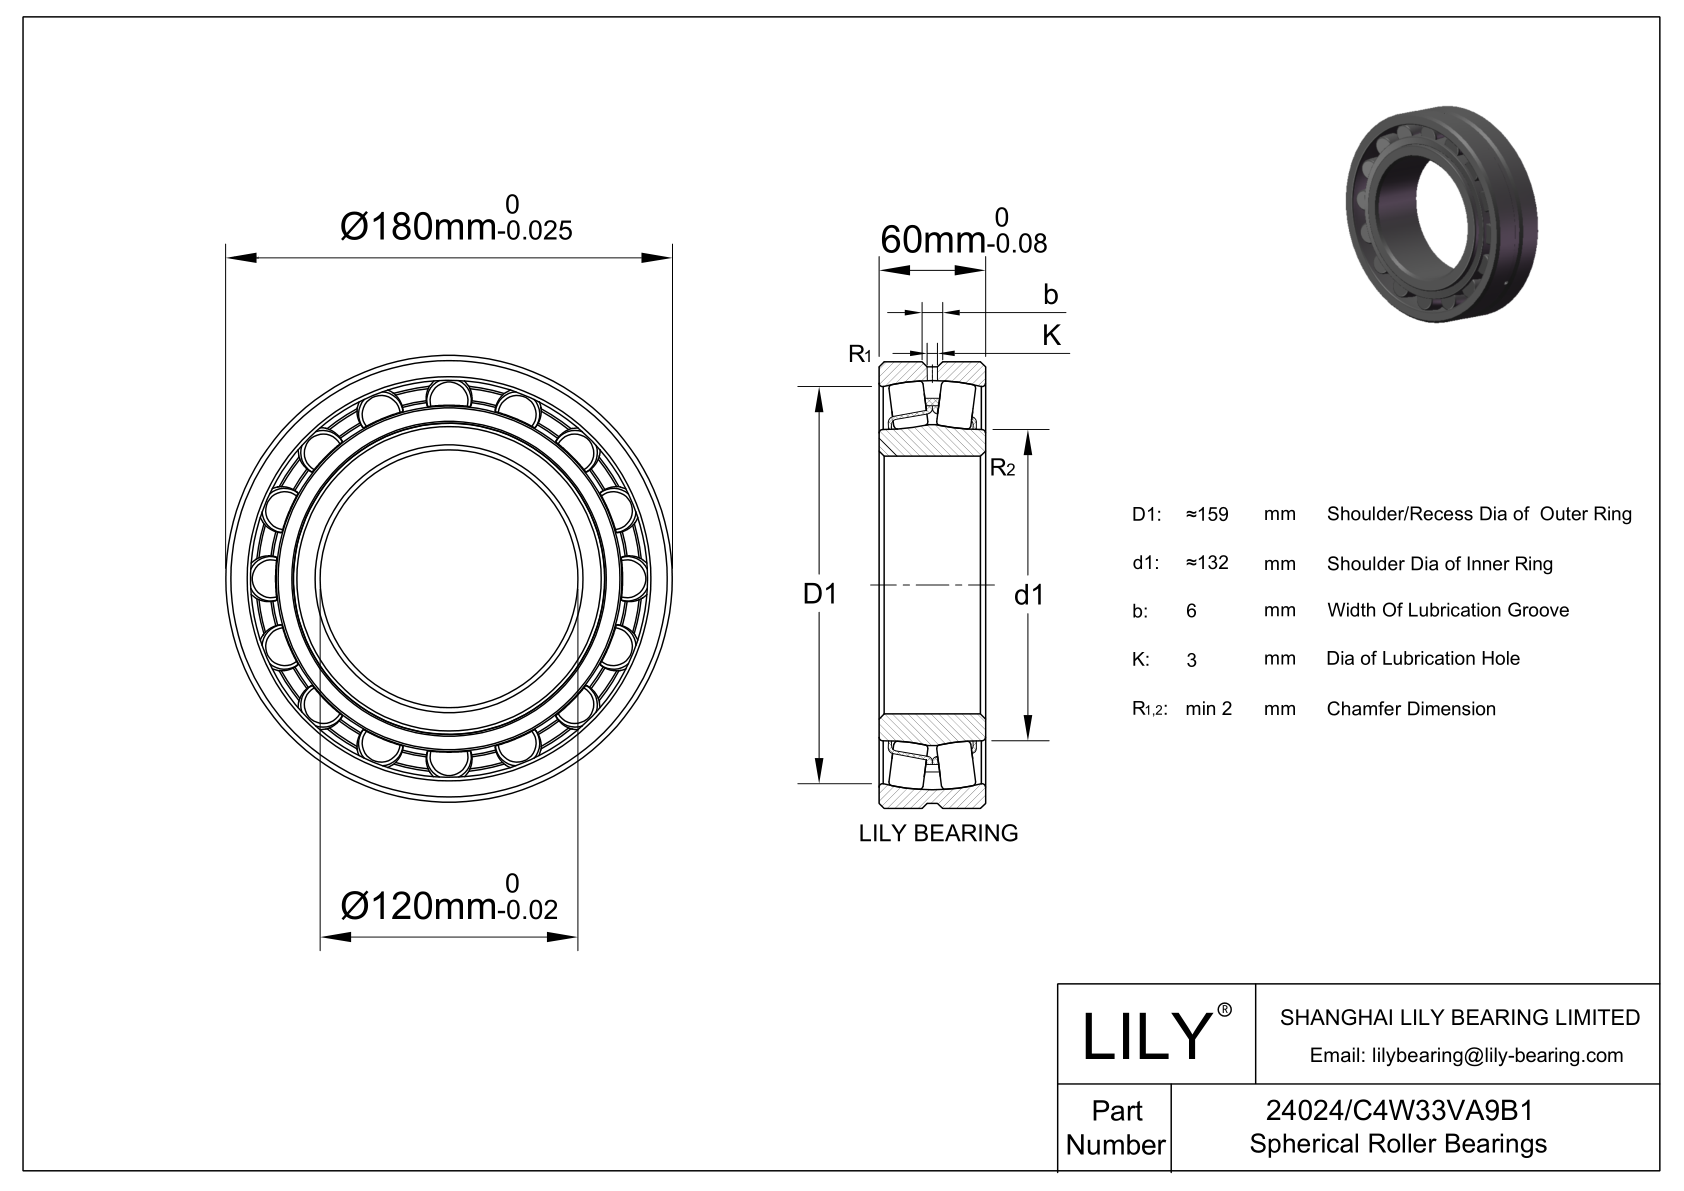 24024/C4W33VA9B1 Double Row Spherical Roller Bearing cad drawing